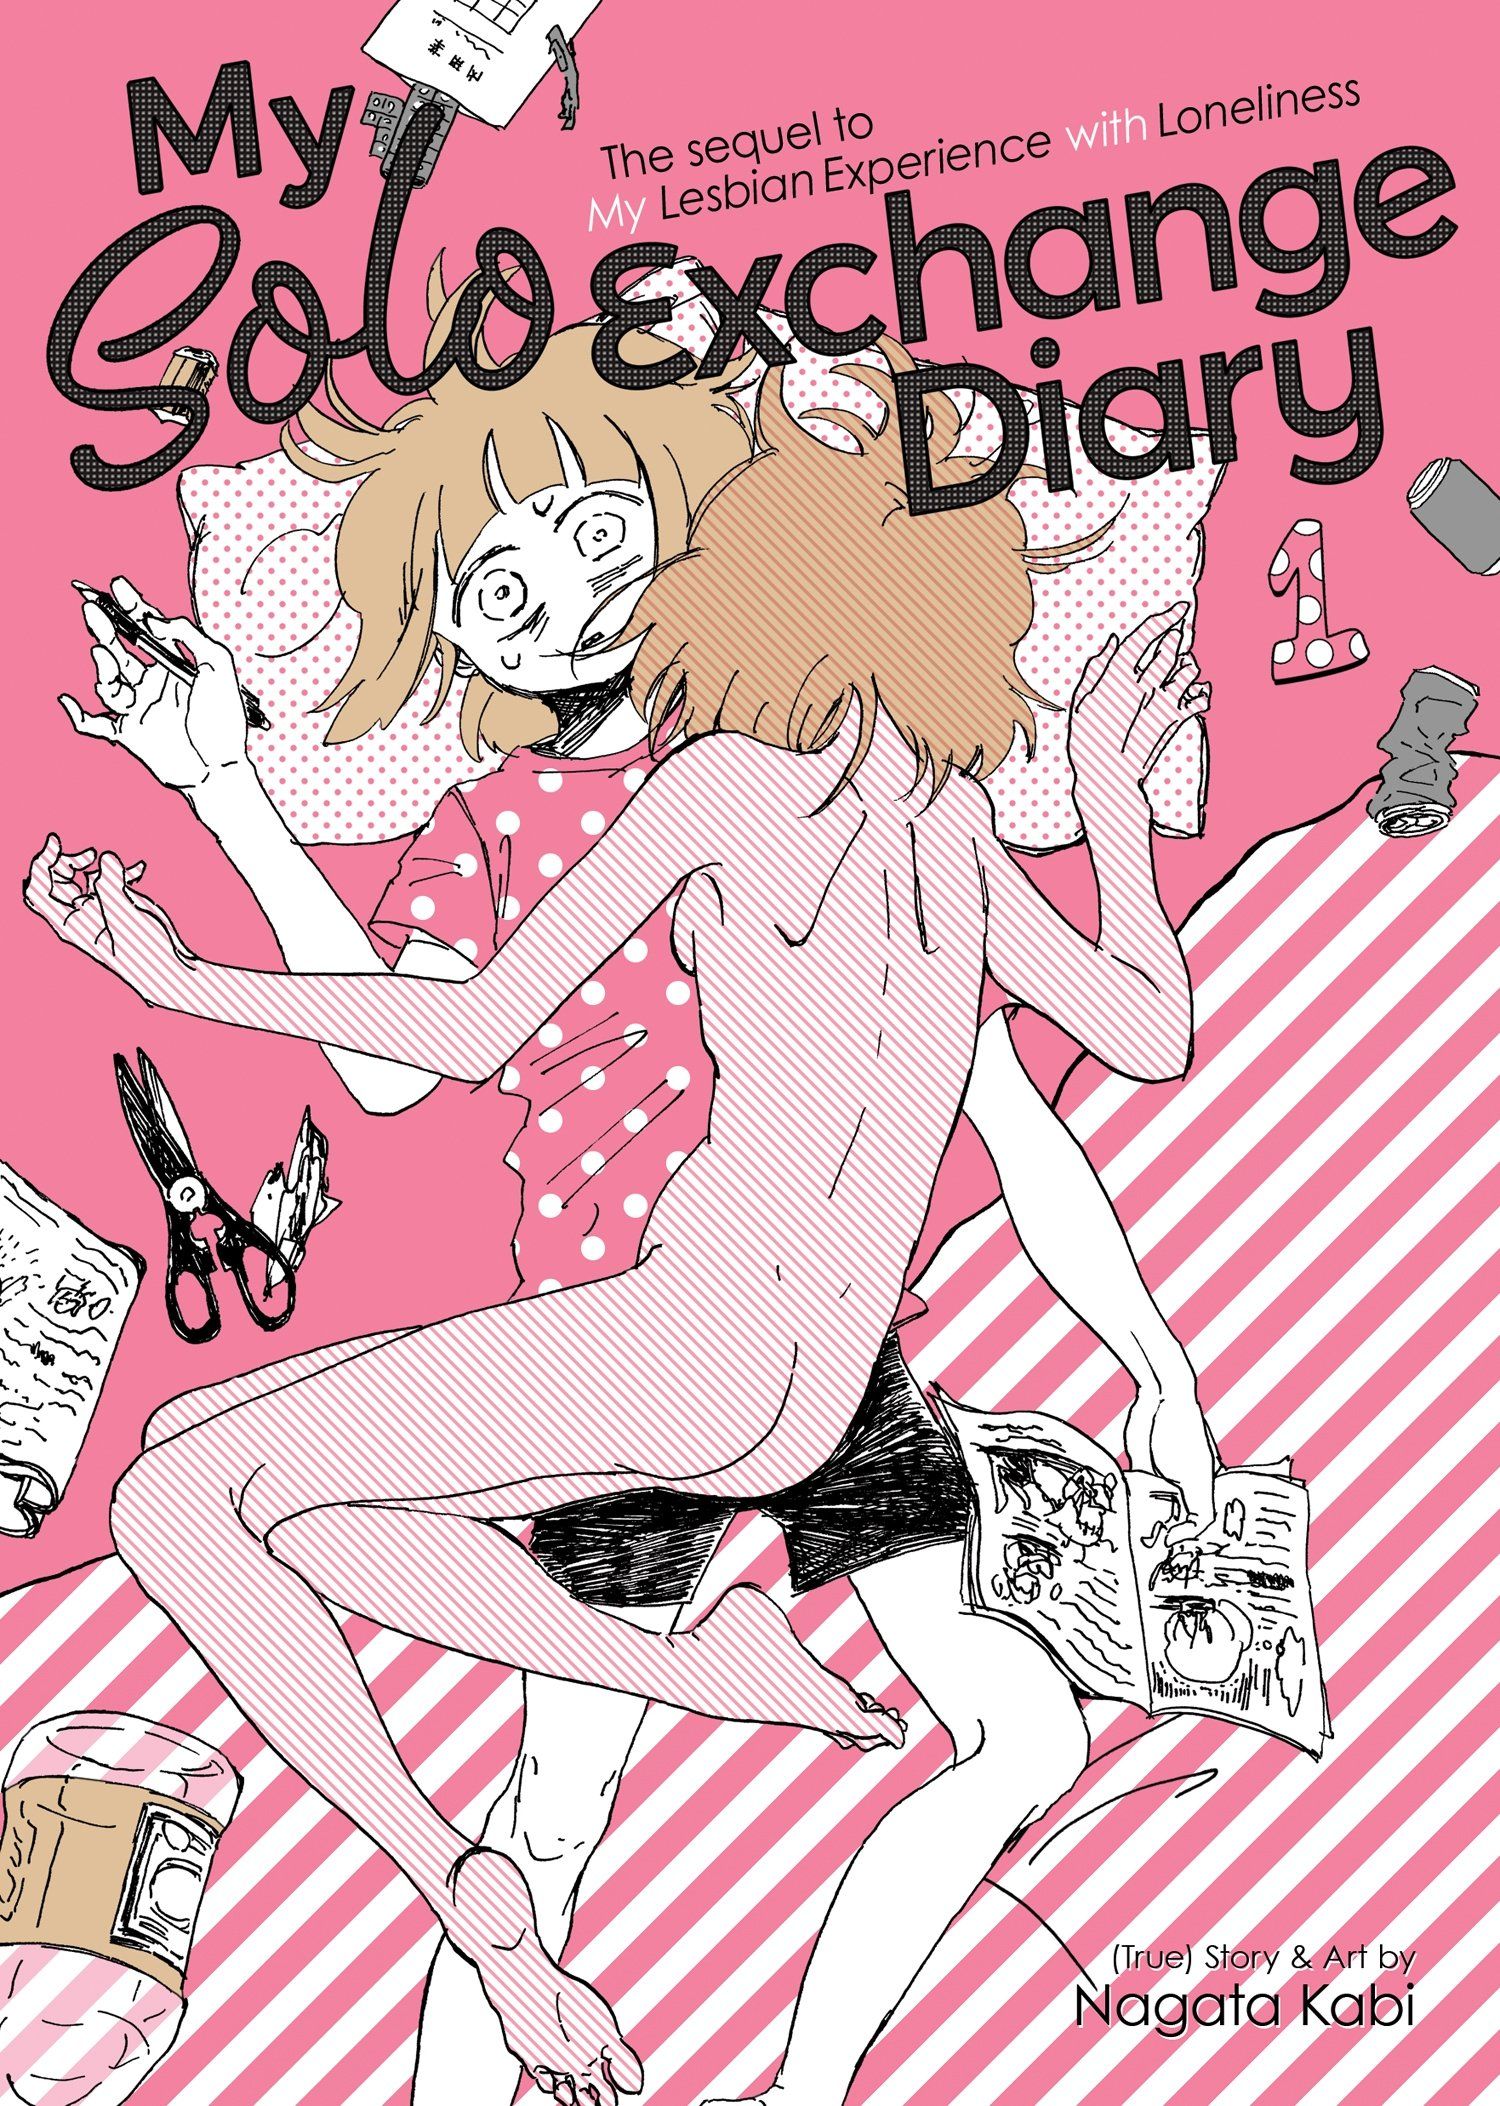 My Solo Exchange Diary by Nagata Kabi cover